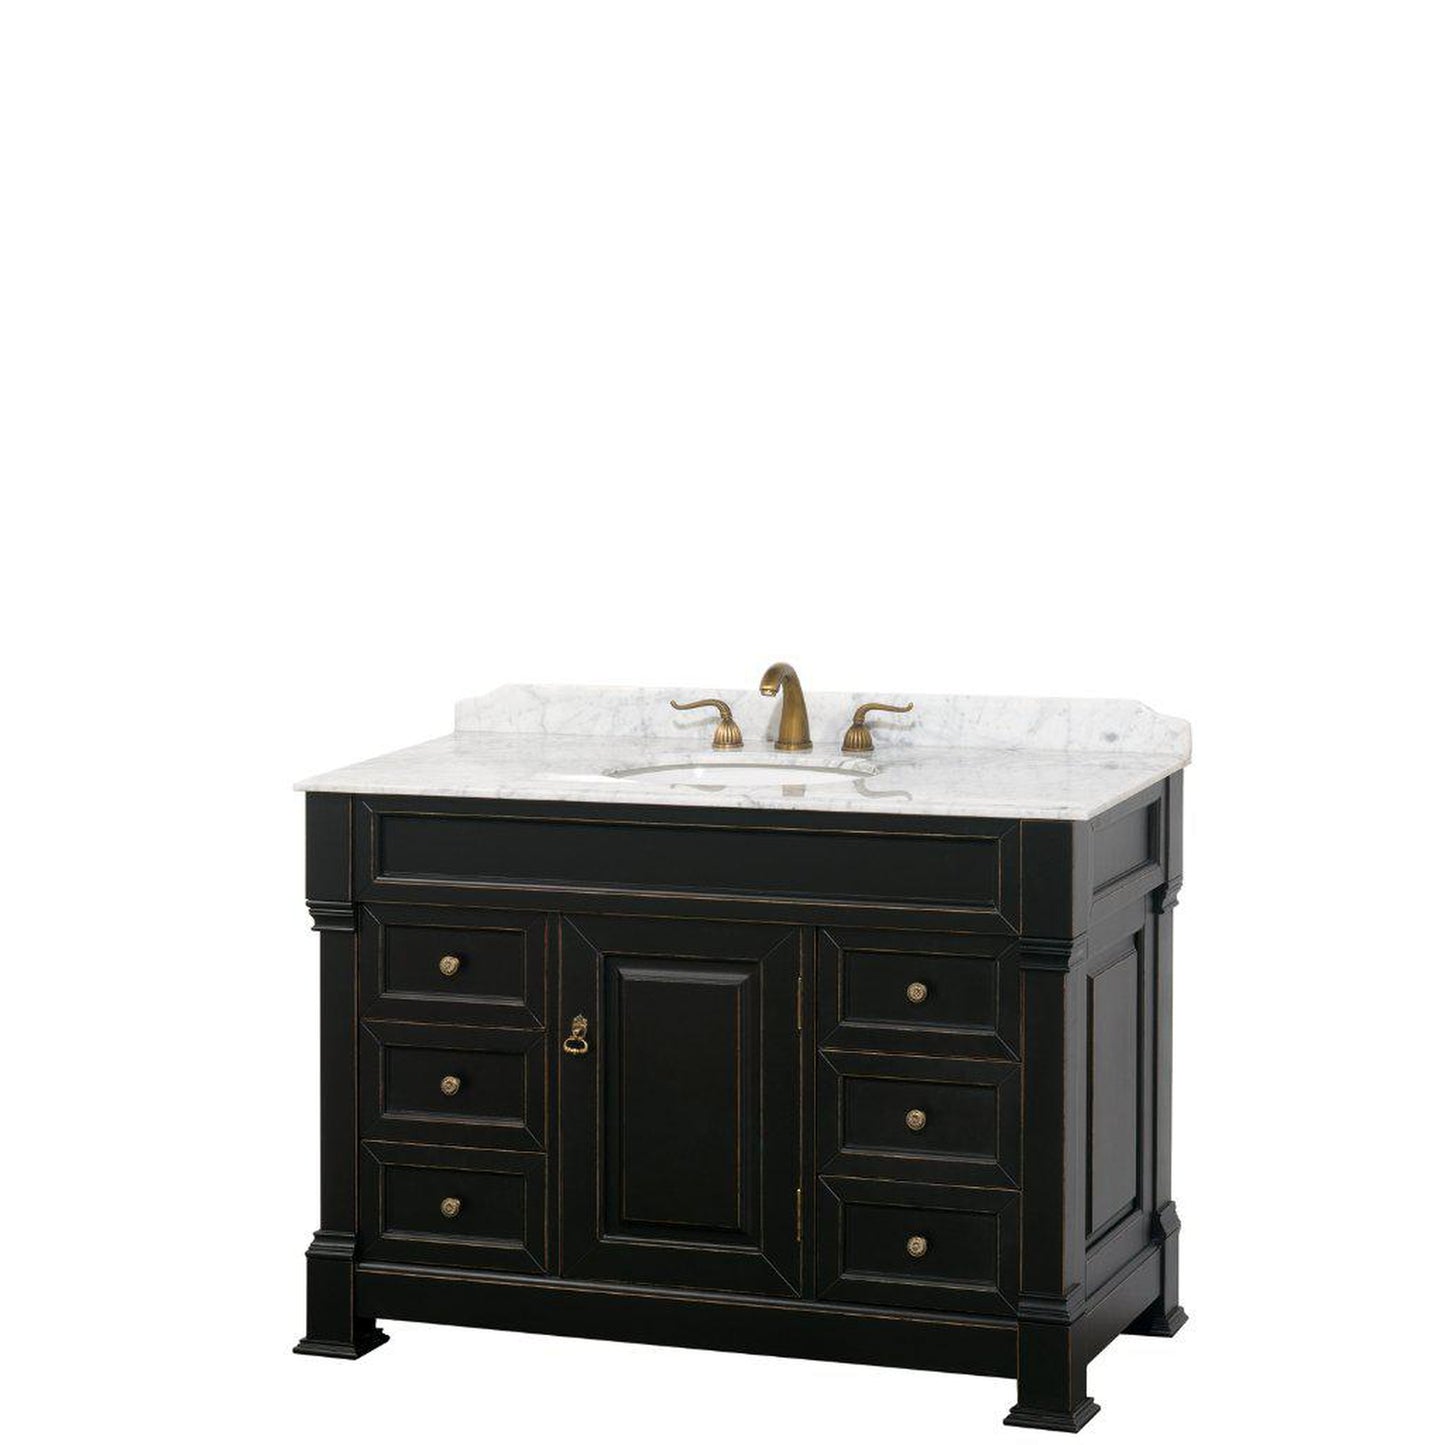 Wyndham Collection Andover 48" Single Bathroom Black Vanity Set With White Carrara Marble Countertop And Undermount Oval Sink, And No Mirror